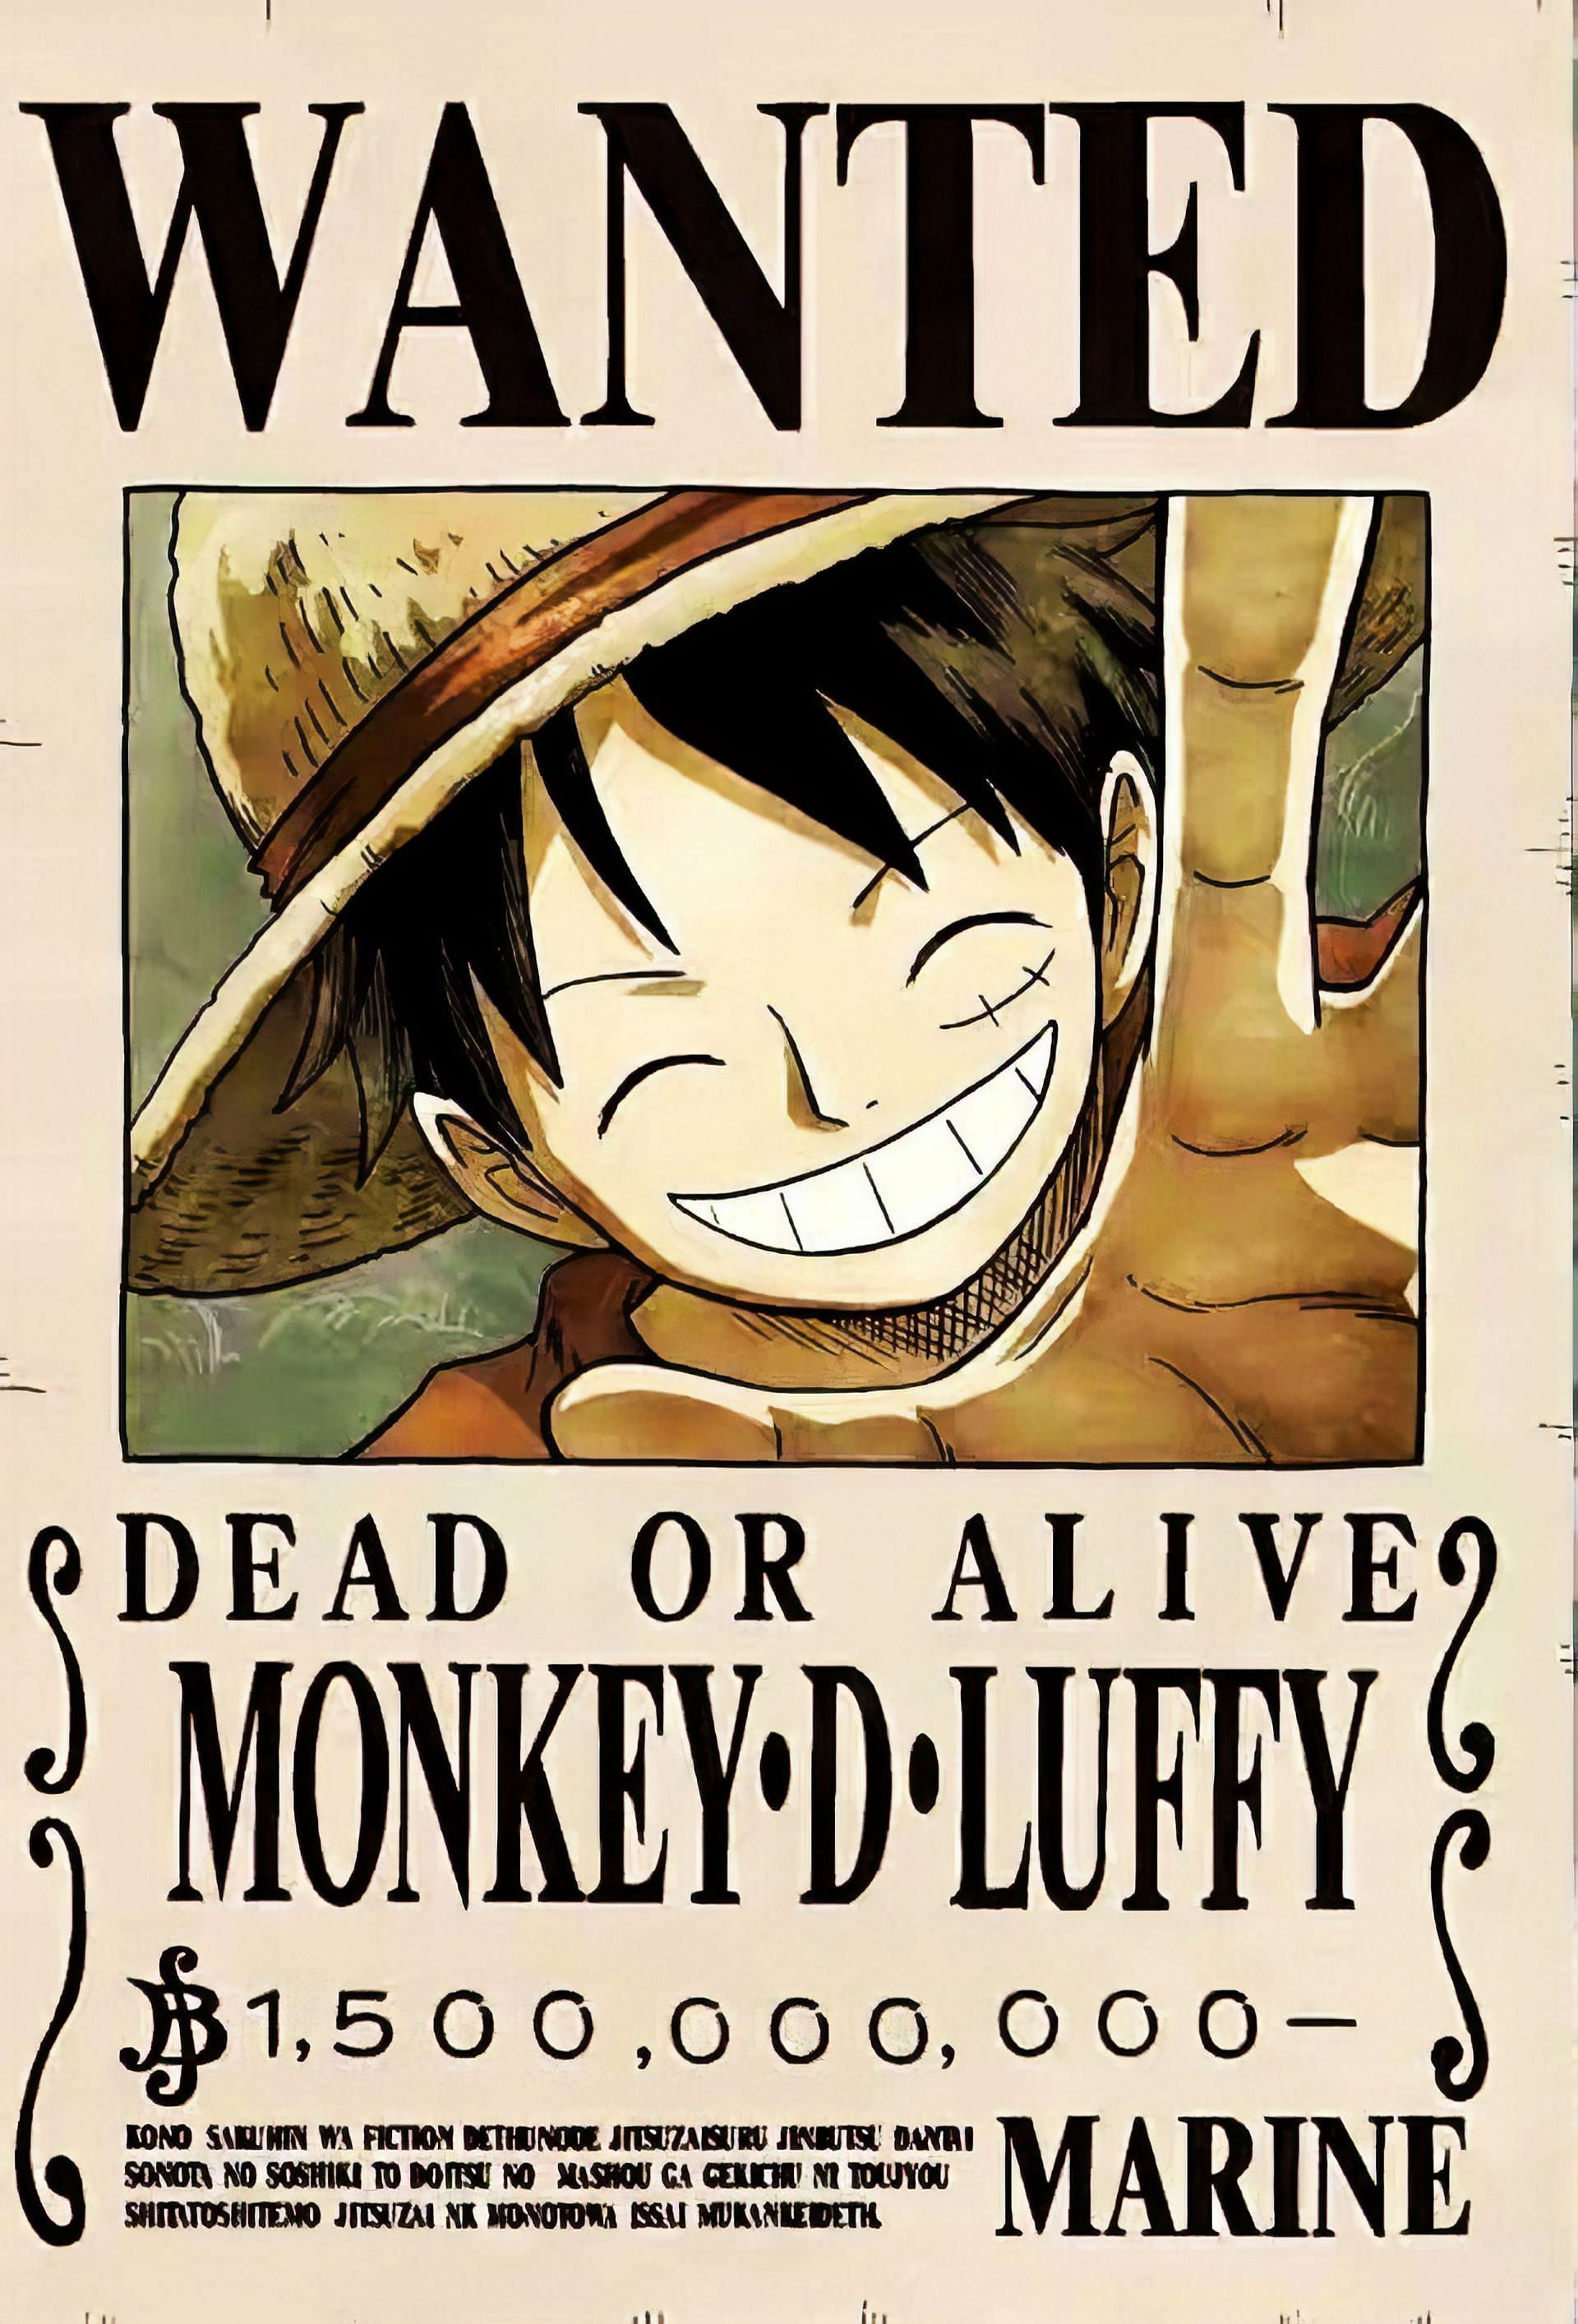 Luffy wanted poster (Image via WallpaperAccess)